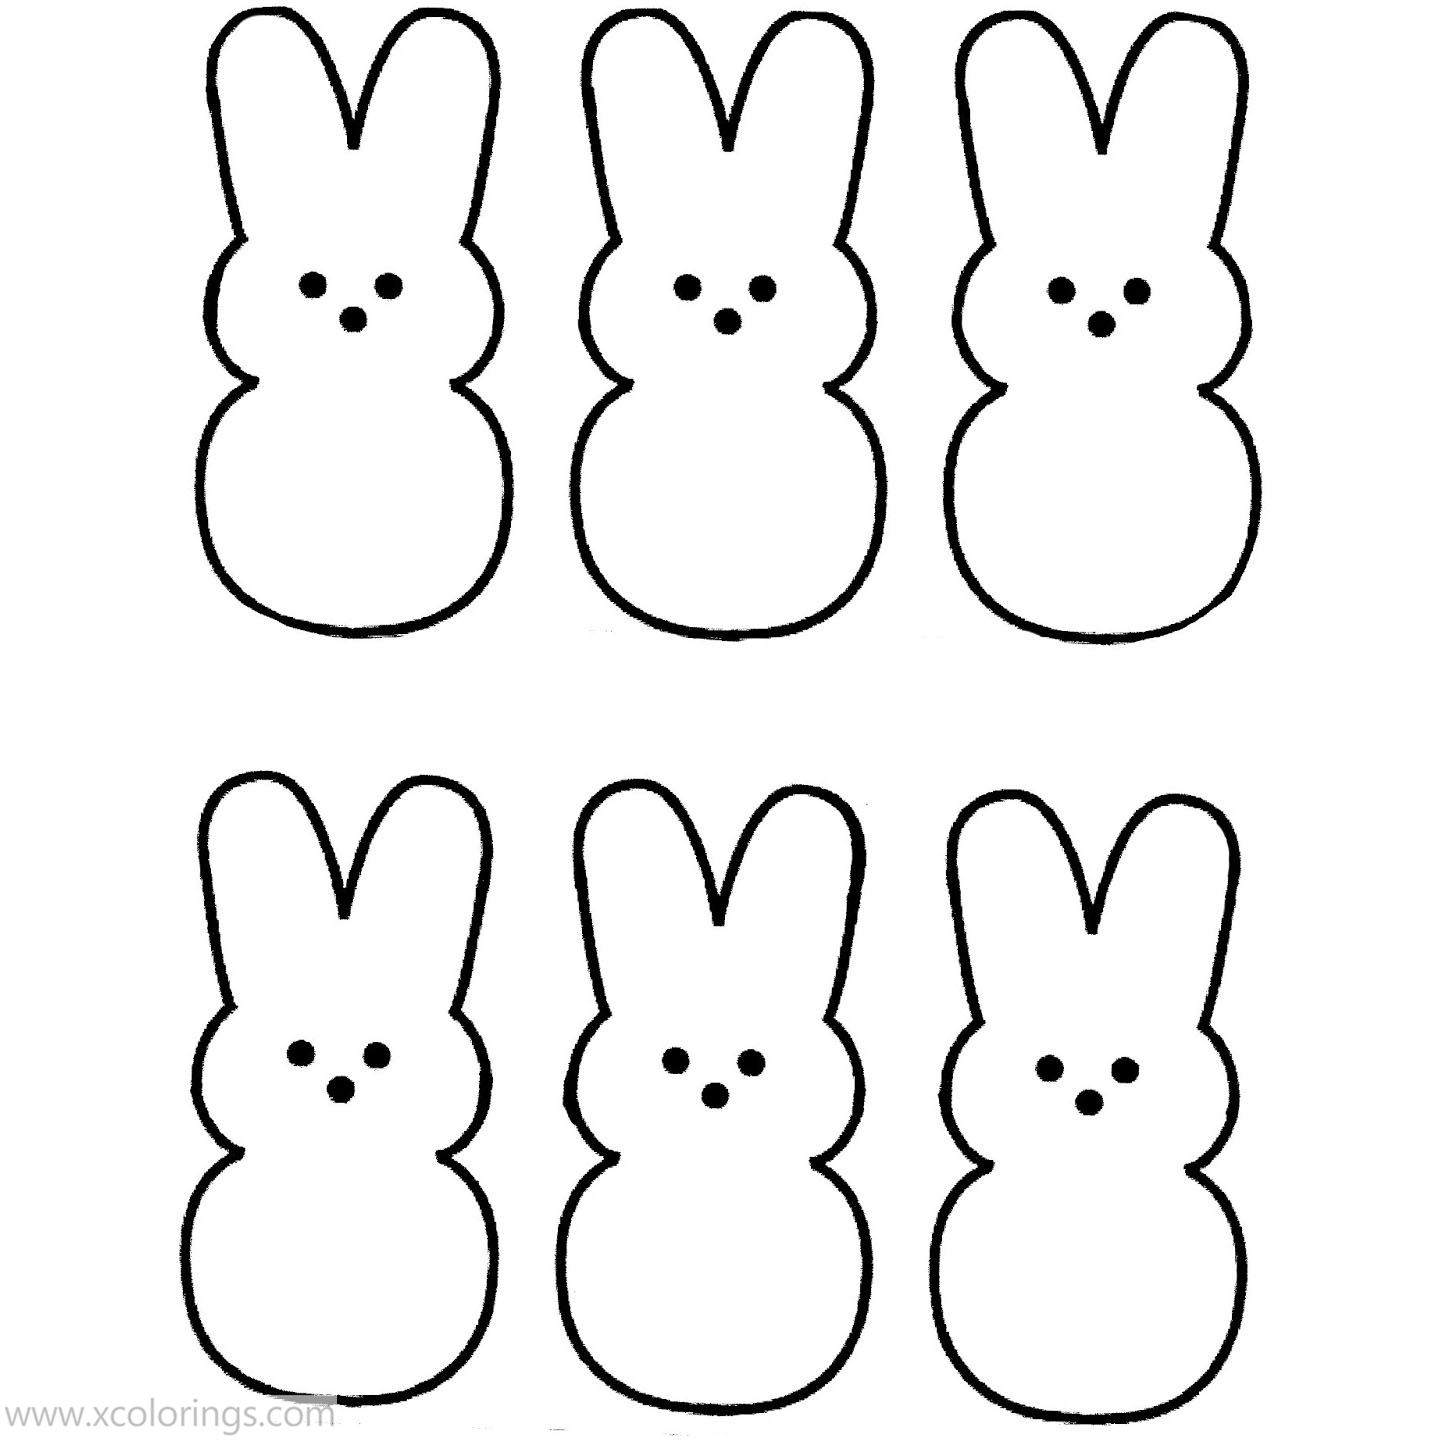 Free Marshmallow Peeps Coloring Pages Bunnies printable